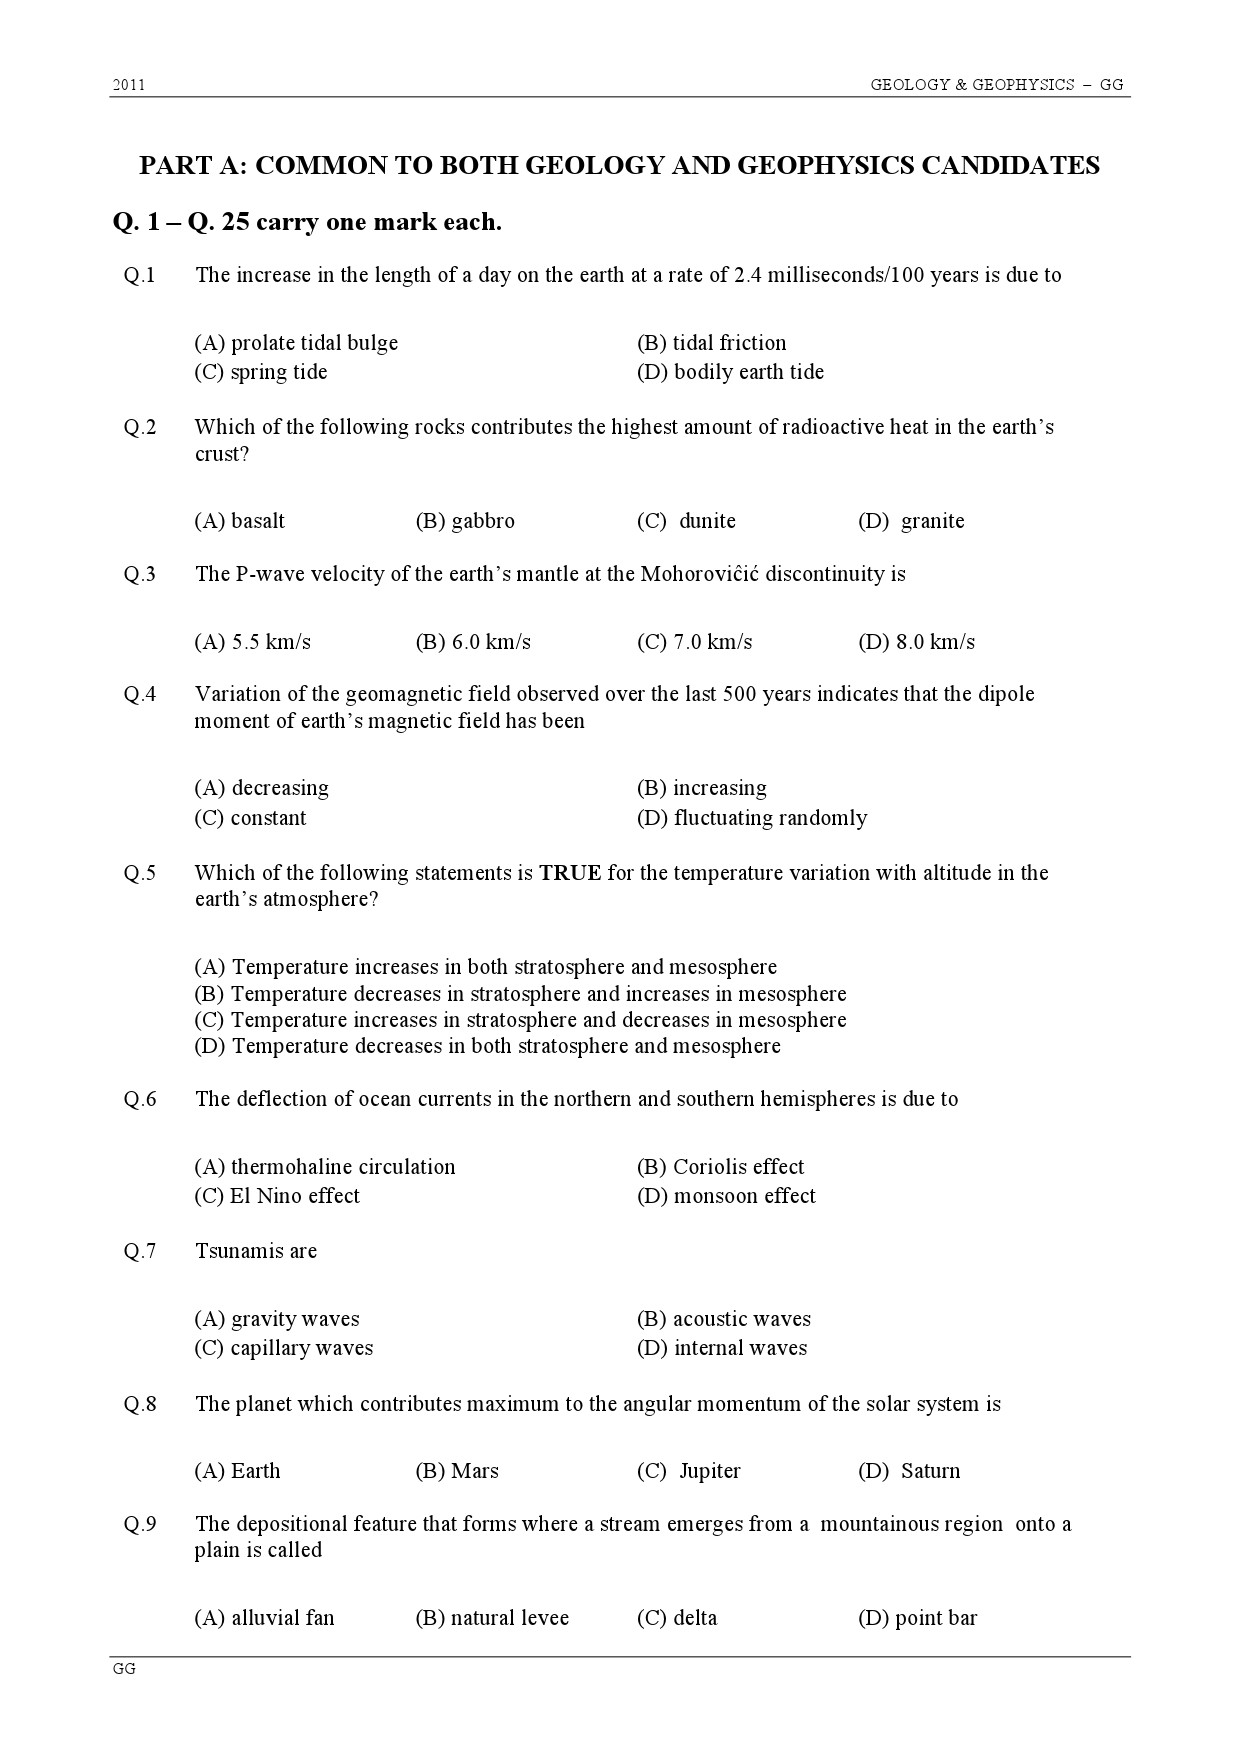 GATE Exam Question Paper 2011 Geology and Geophysics 2